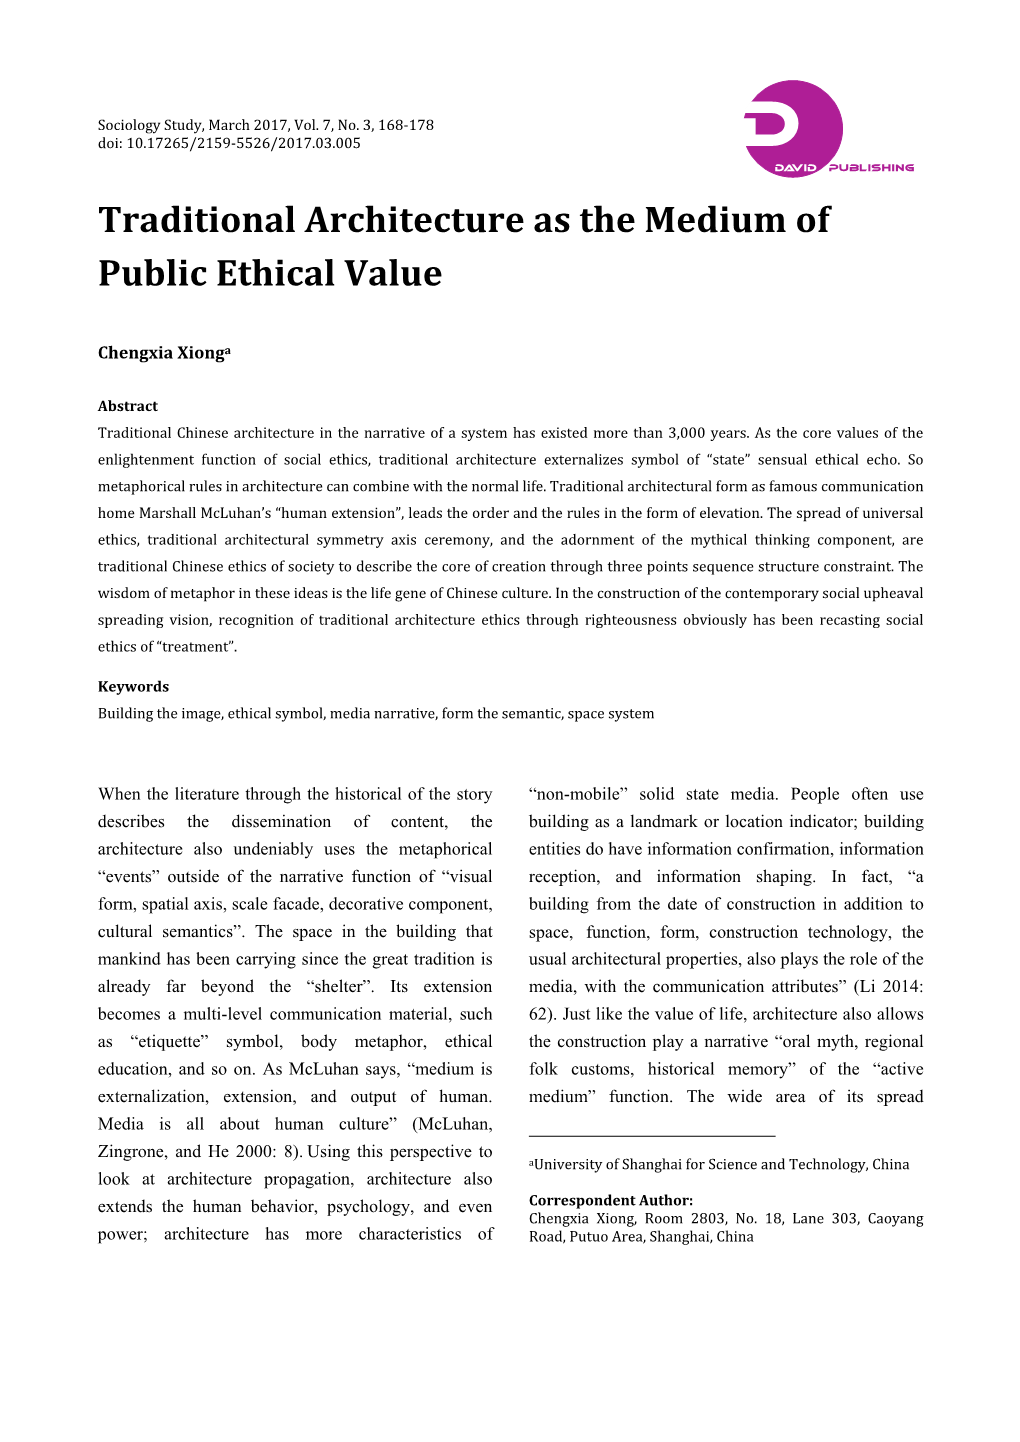 Traditional Architecture As the Medium of Public Ethical Value